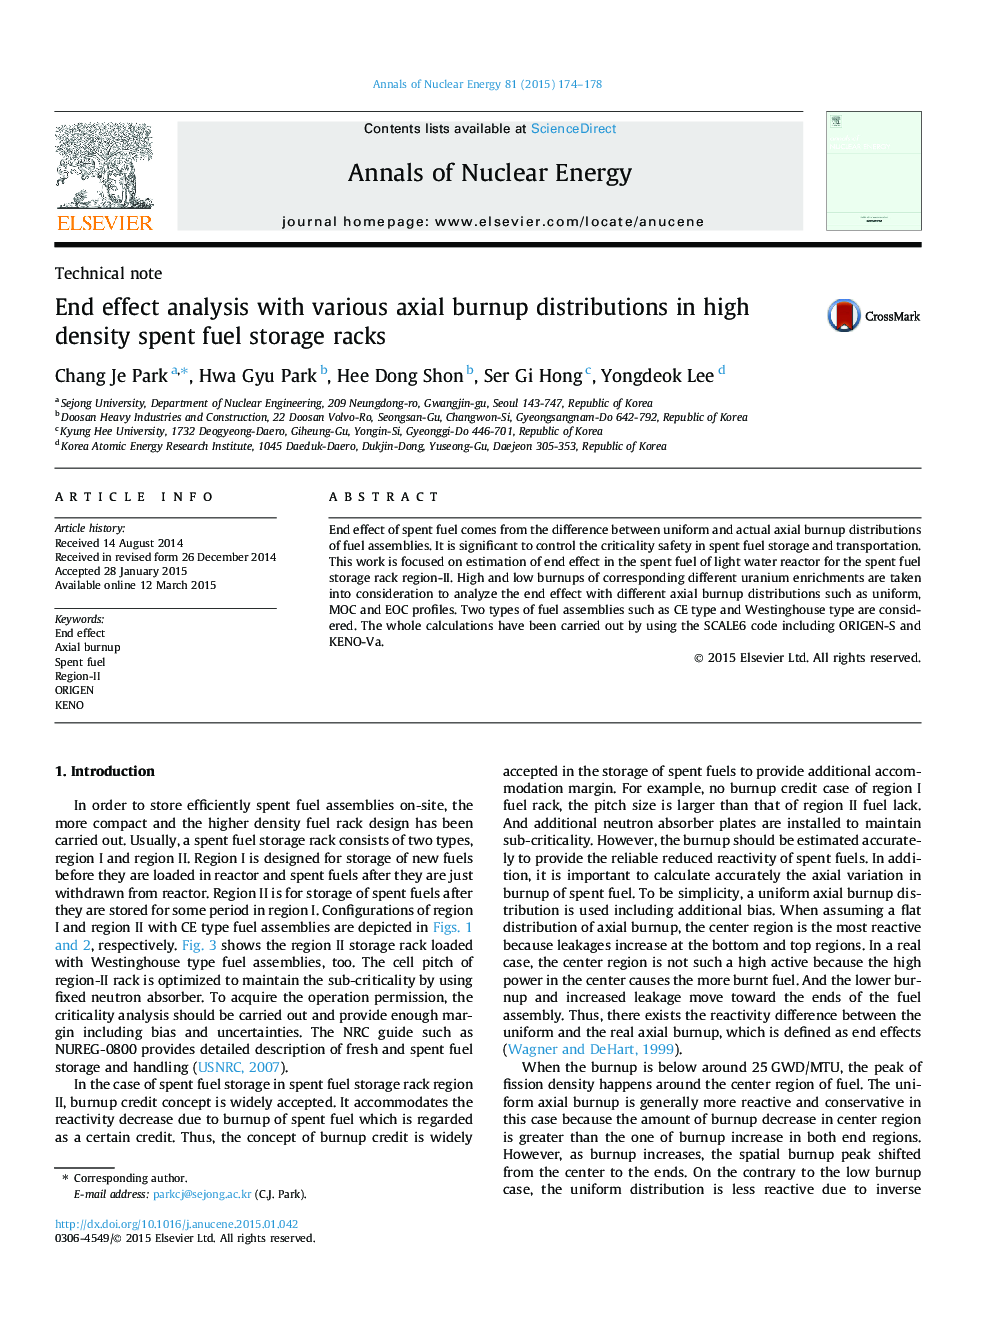 End effect analysis with various axial burnup distributions in high density spent fuel storage racks